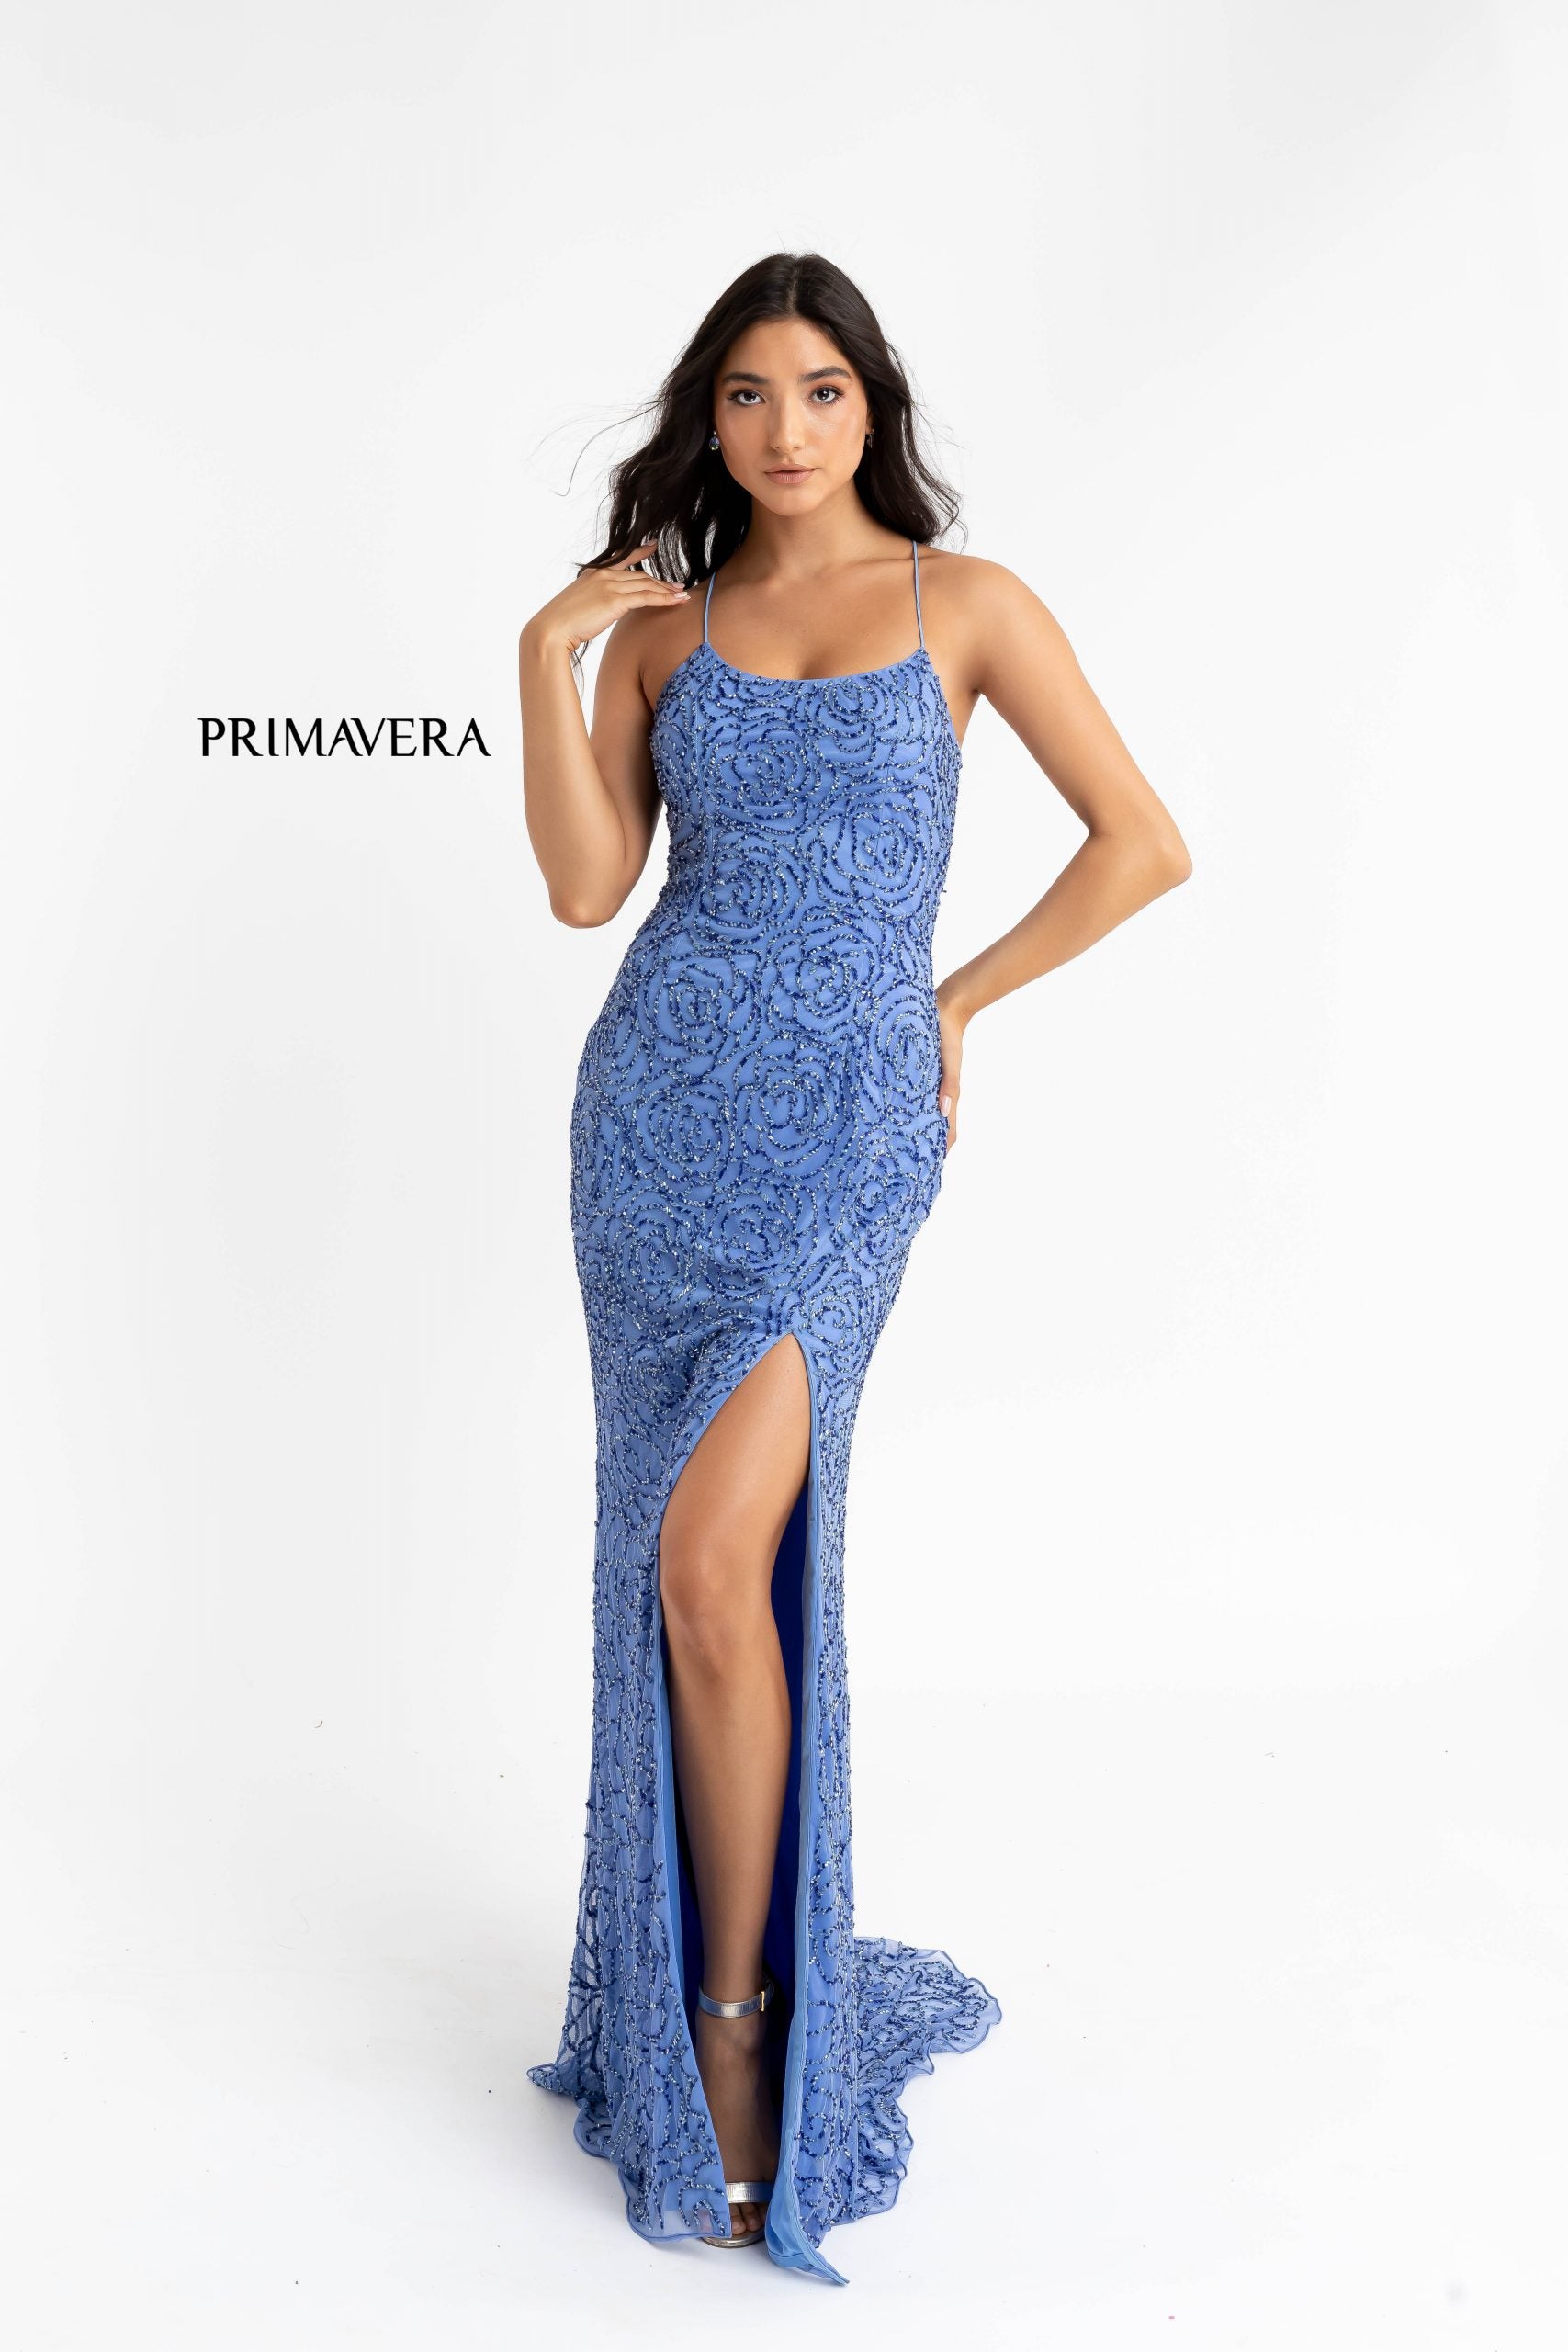 Primavera Couture 3638 is a stunning Long Fitted Formal Evening Prom Dress. Featuring Beaded Floral Embellishments along the entire evening gown. Scoop neckline with spaghetti straps leading around to an open back with a lace up tie corset closure. Slit in skirt and sweeping train. Great Prom & Pageant Style!